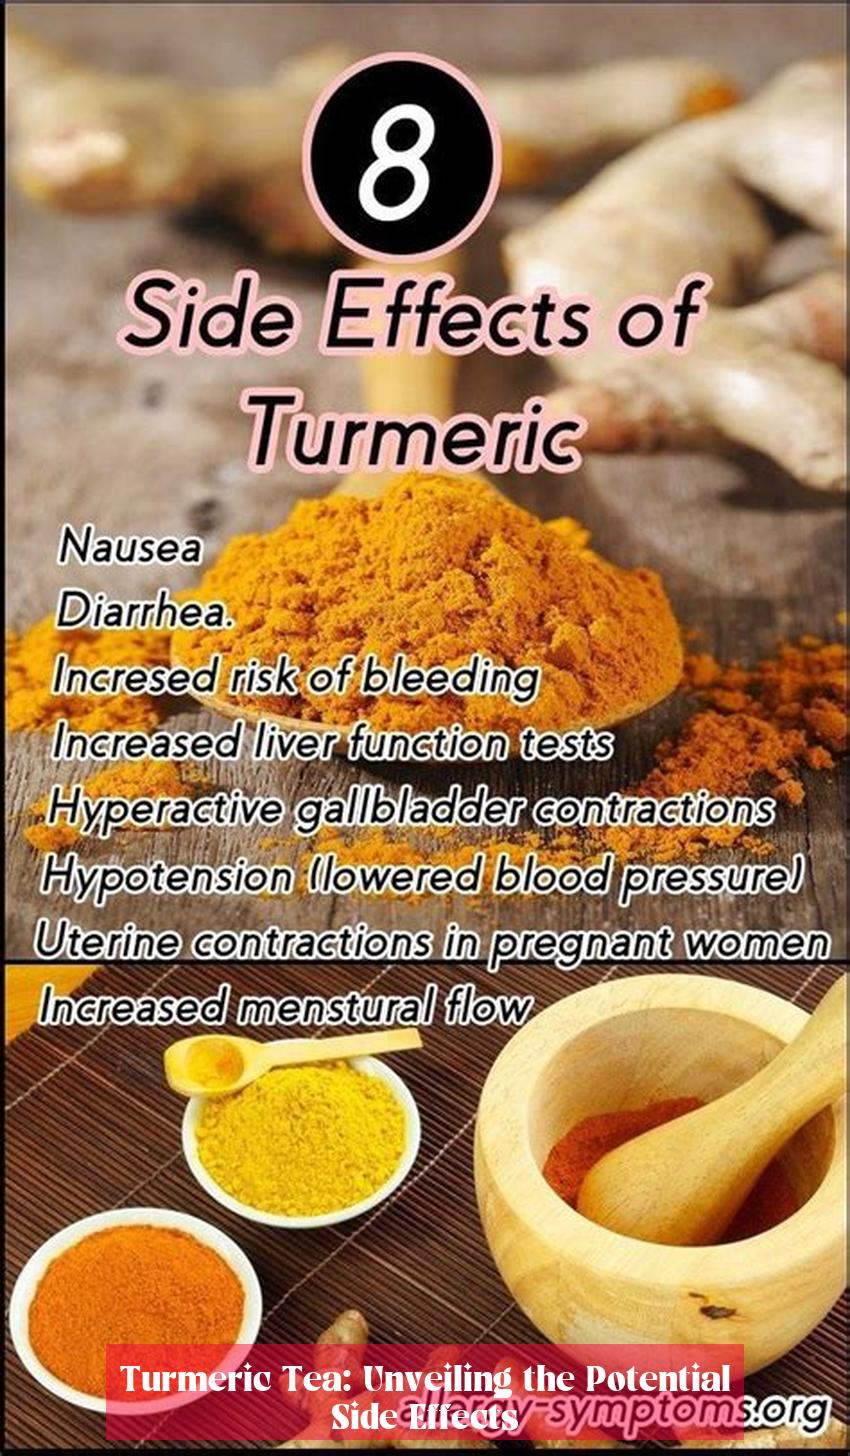 Turmeric Tea: Unveiling the Potential Side Effects